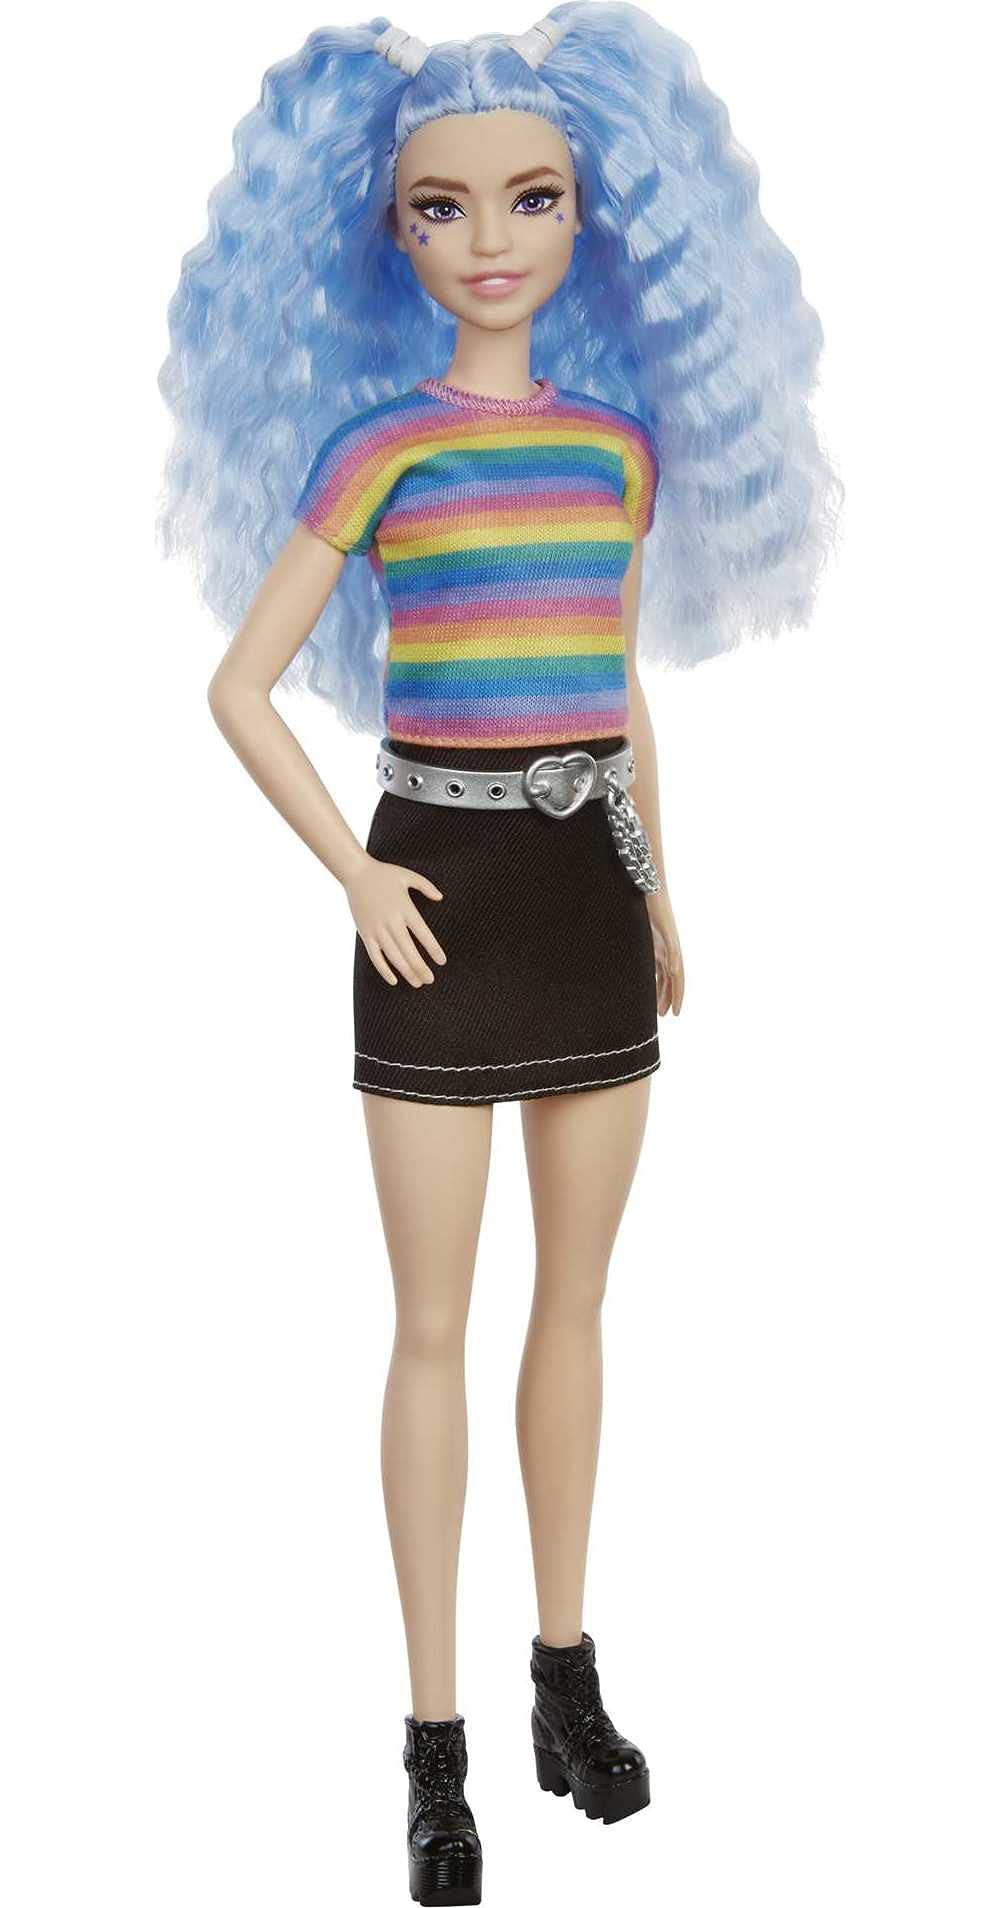 Barbie Fashionistas Doll # 170, Rainbow Striped Top & Black Skirt, Toy for Kids 3 to 8 Years Old